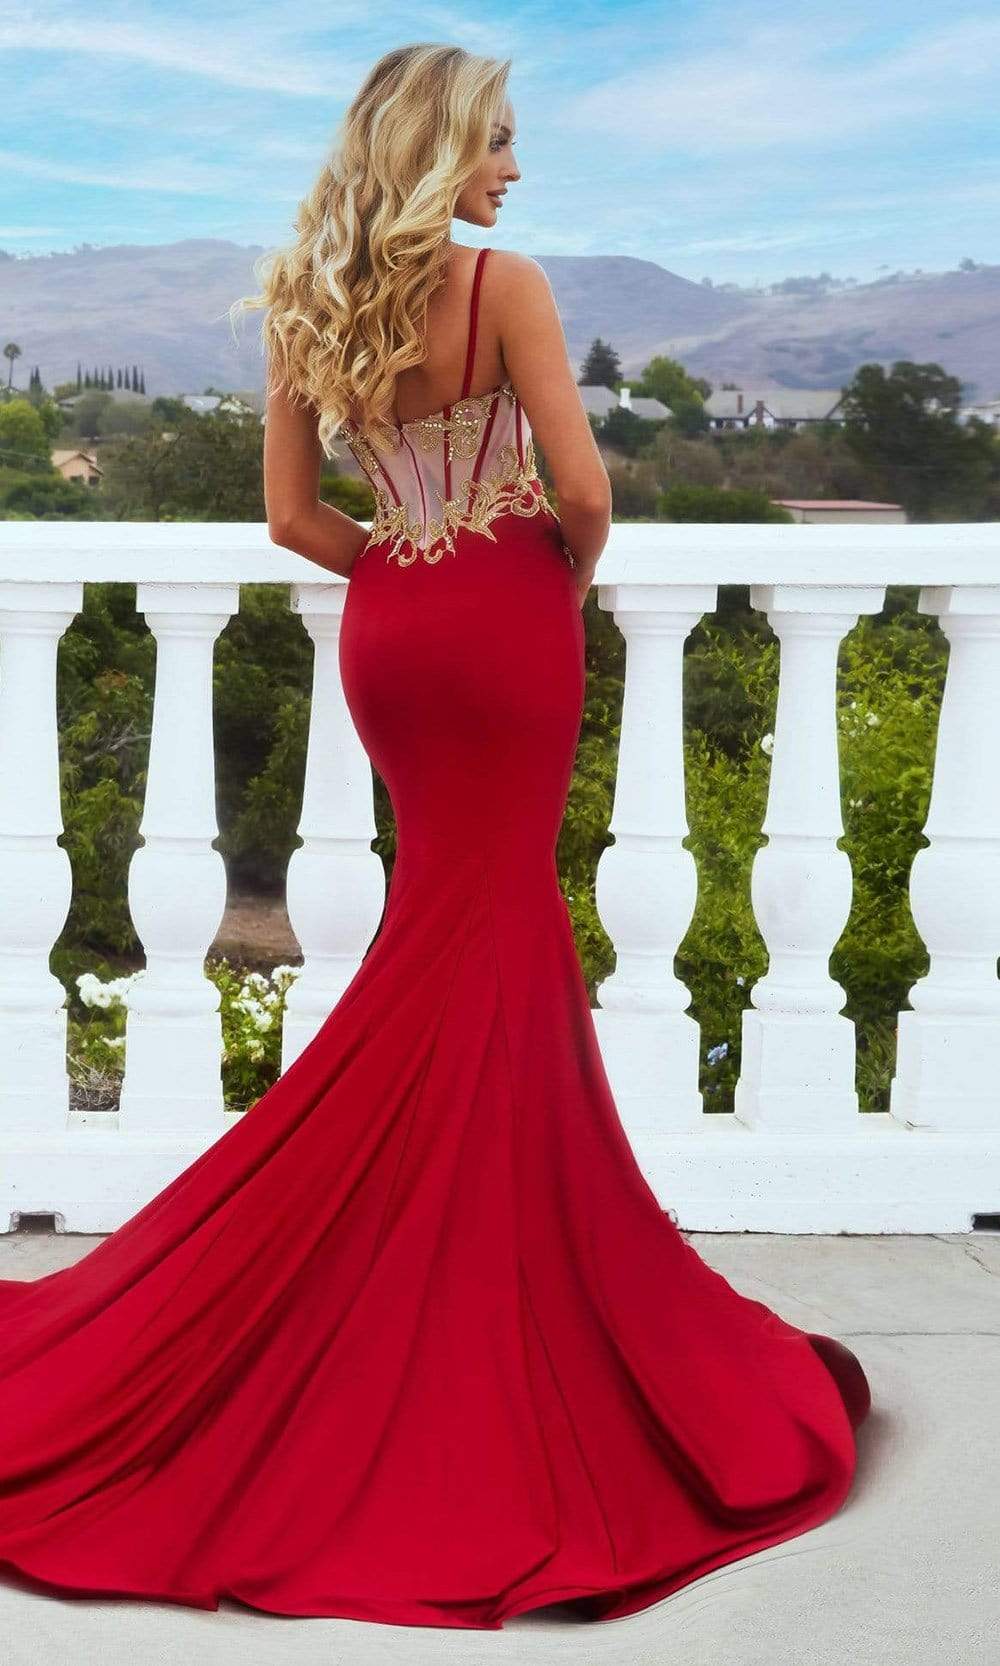 Portia and Scarlett - PS22363 Sweetheart Lace Appliqued Long Dress Prom Dresses